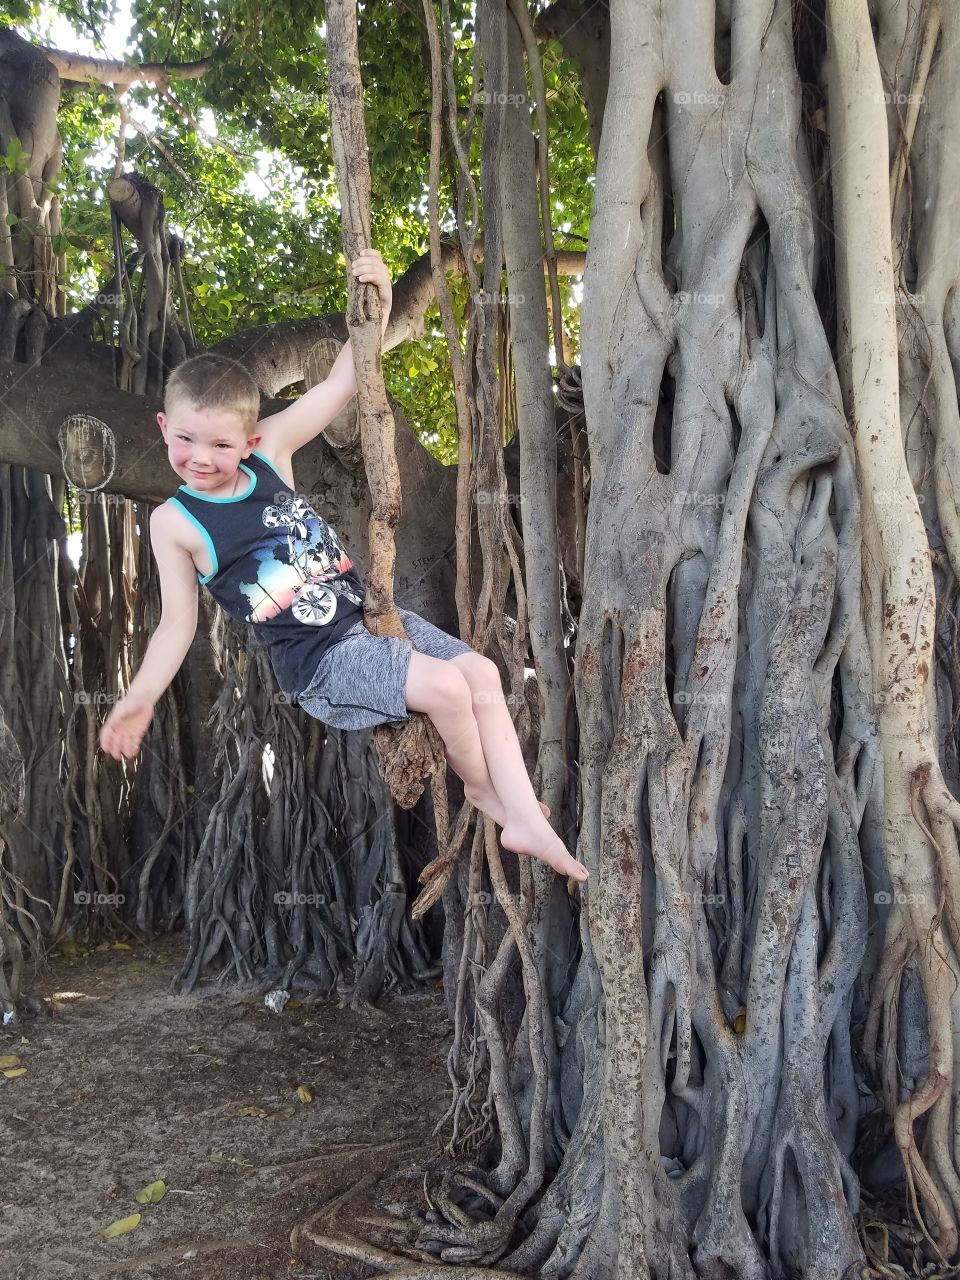 Little boy smiles big while swinging from vine of a banyan tree.